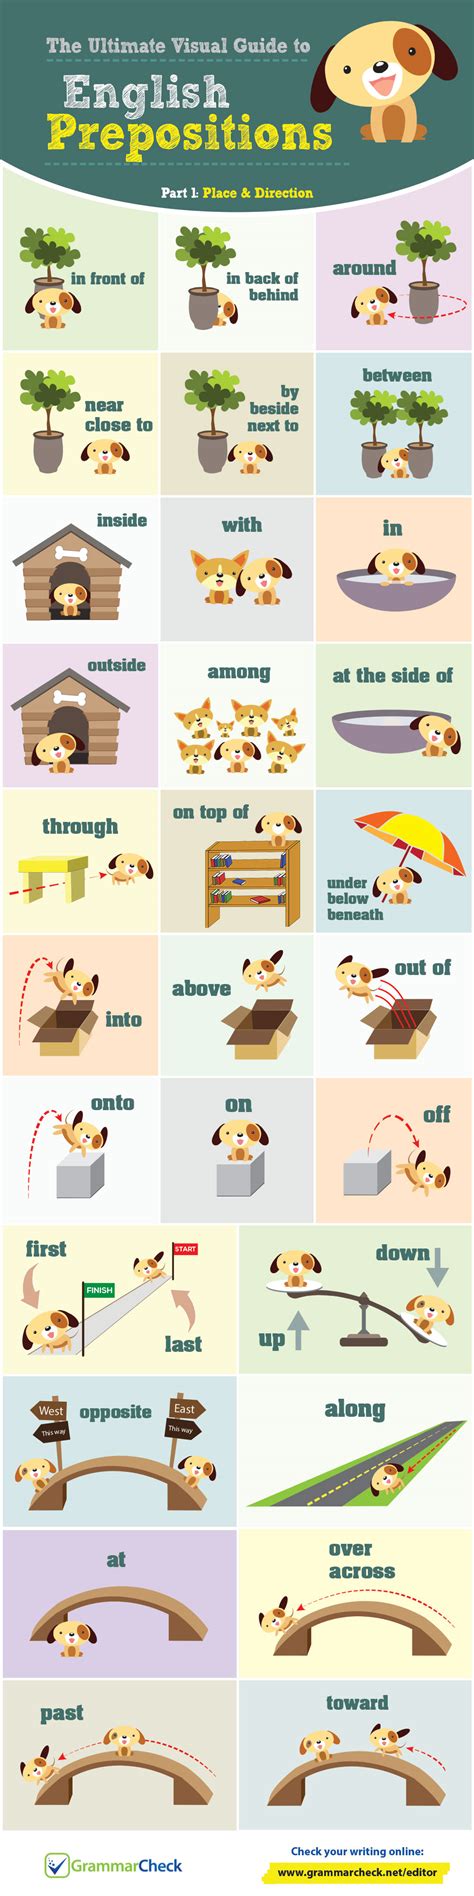 English Prepositions Place And Direction Infographic